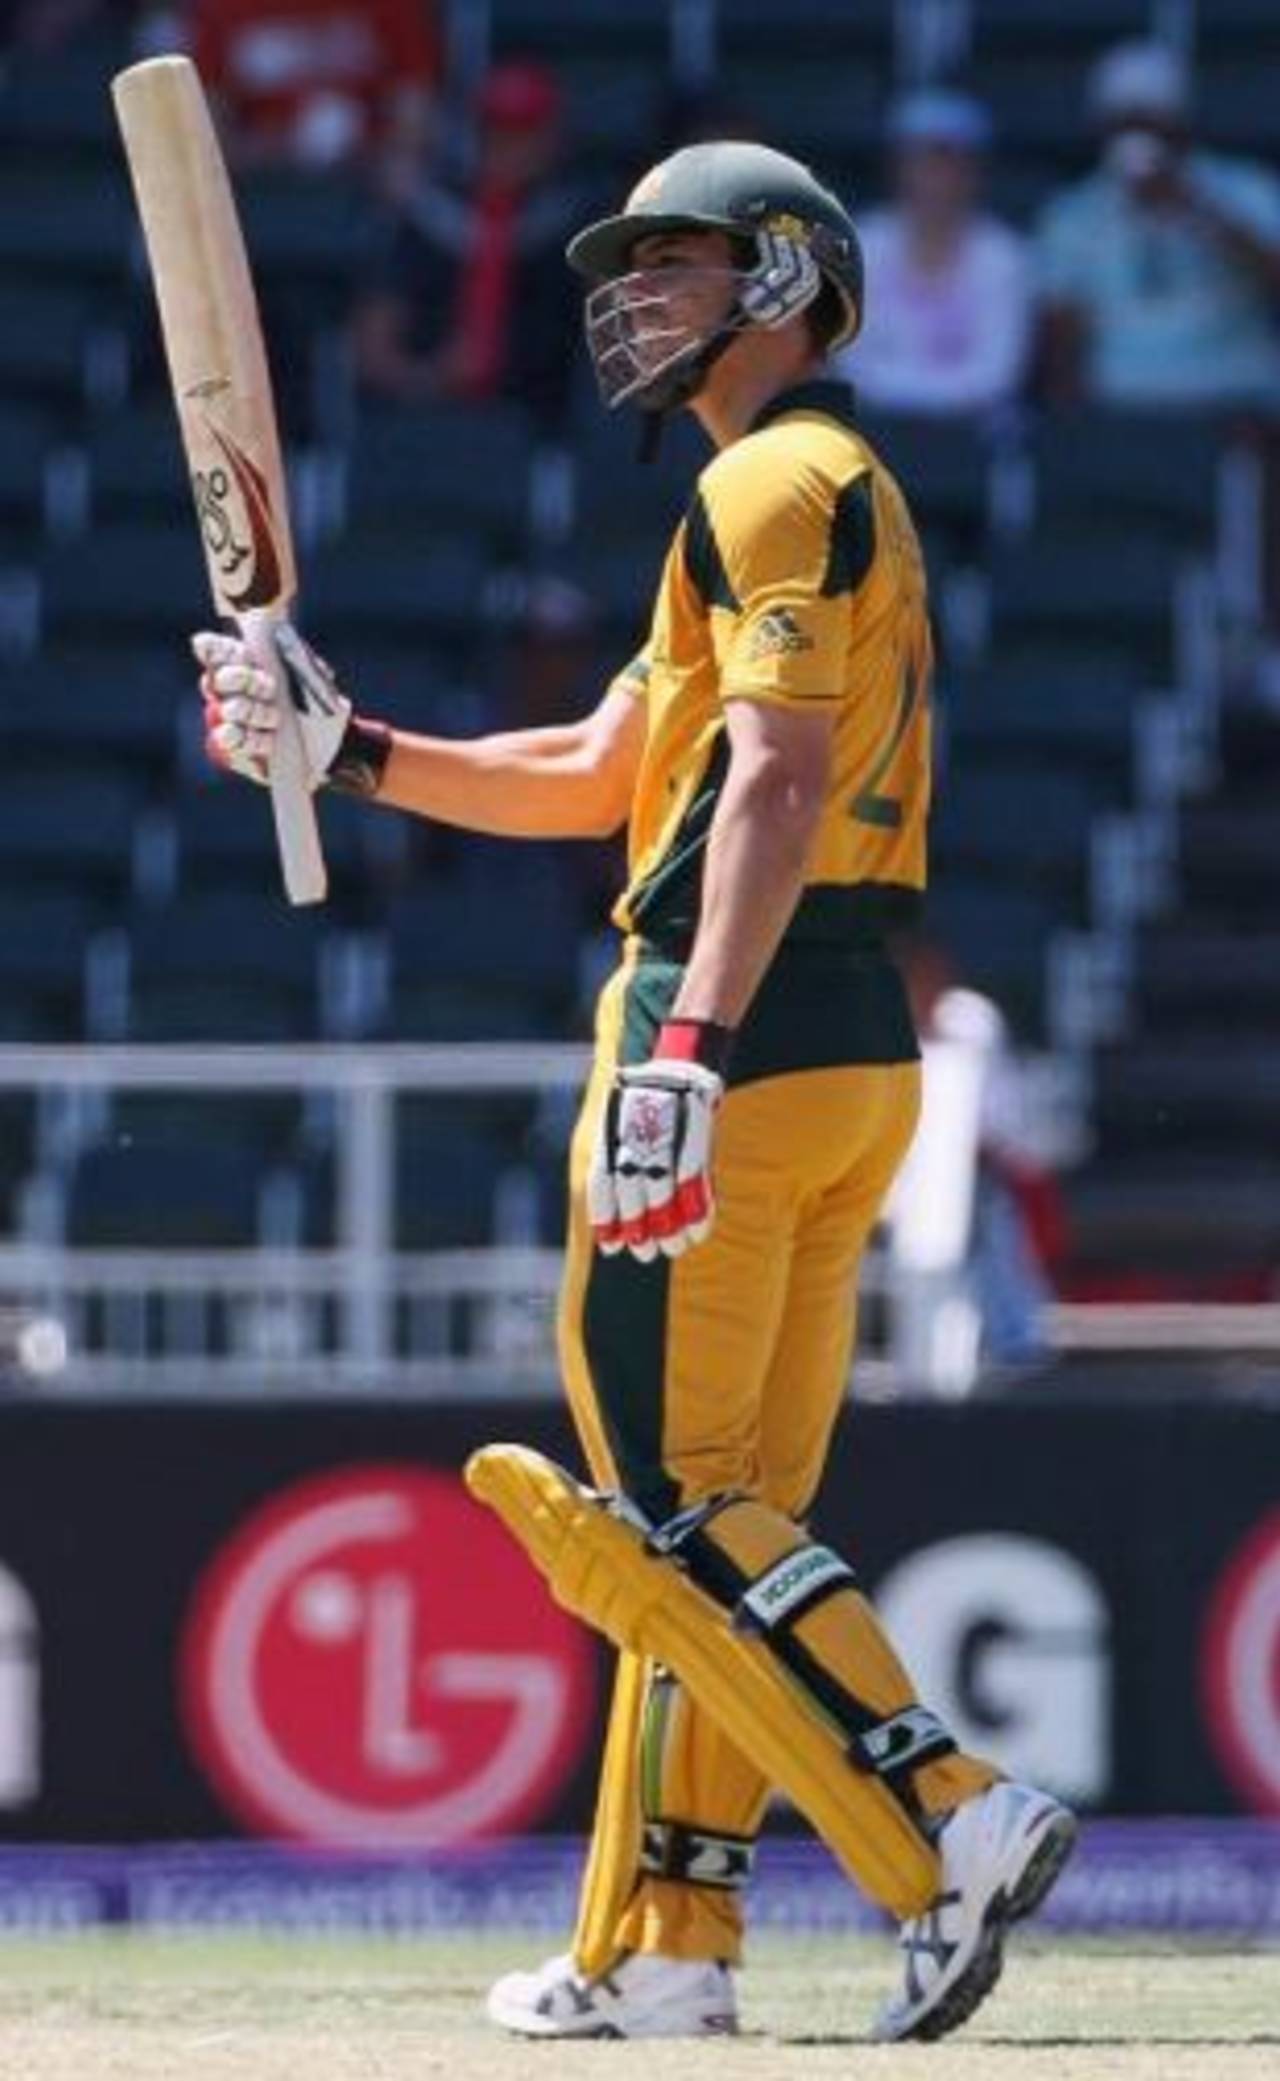 Mitchell Johnson acknowledges the applause for his half-century, Australia v West Indies, ICC Champions Trophy, Group A, Johannesburg, September 26, 2009